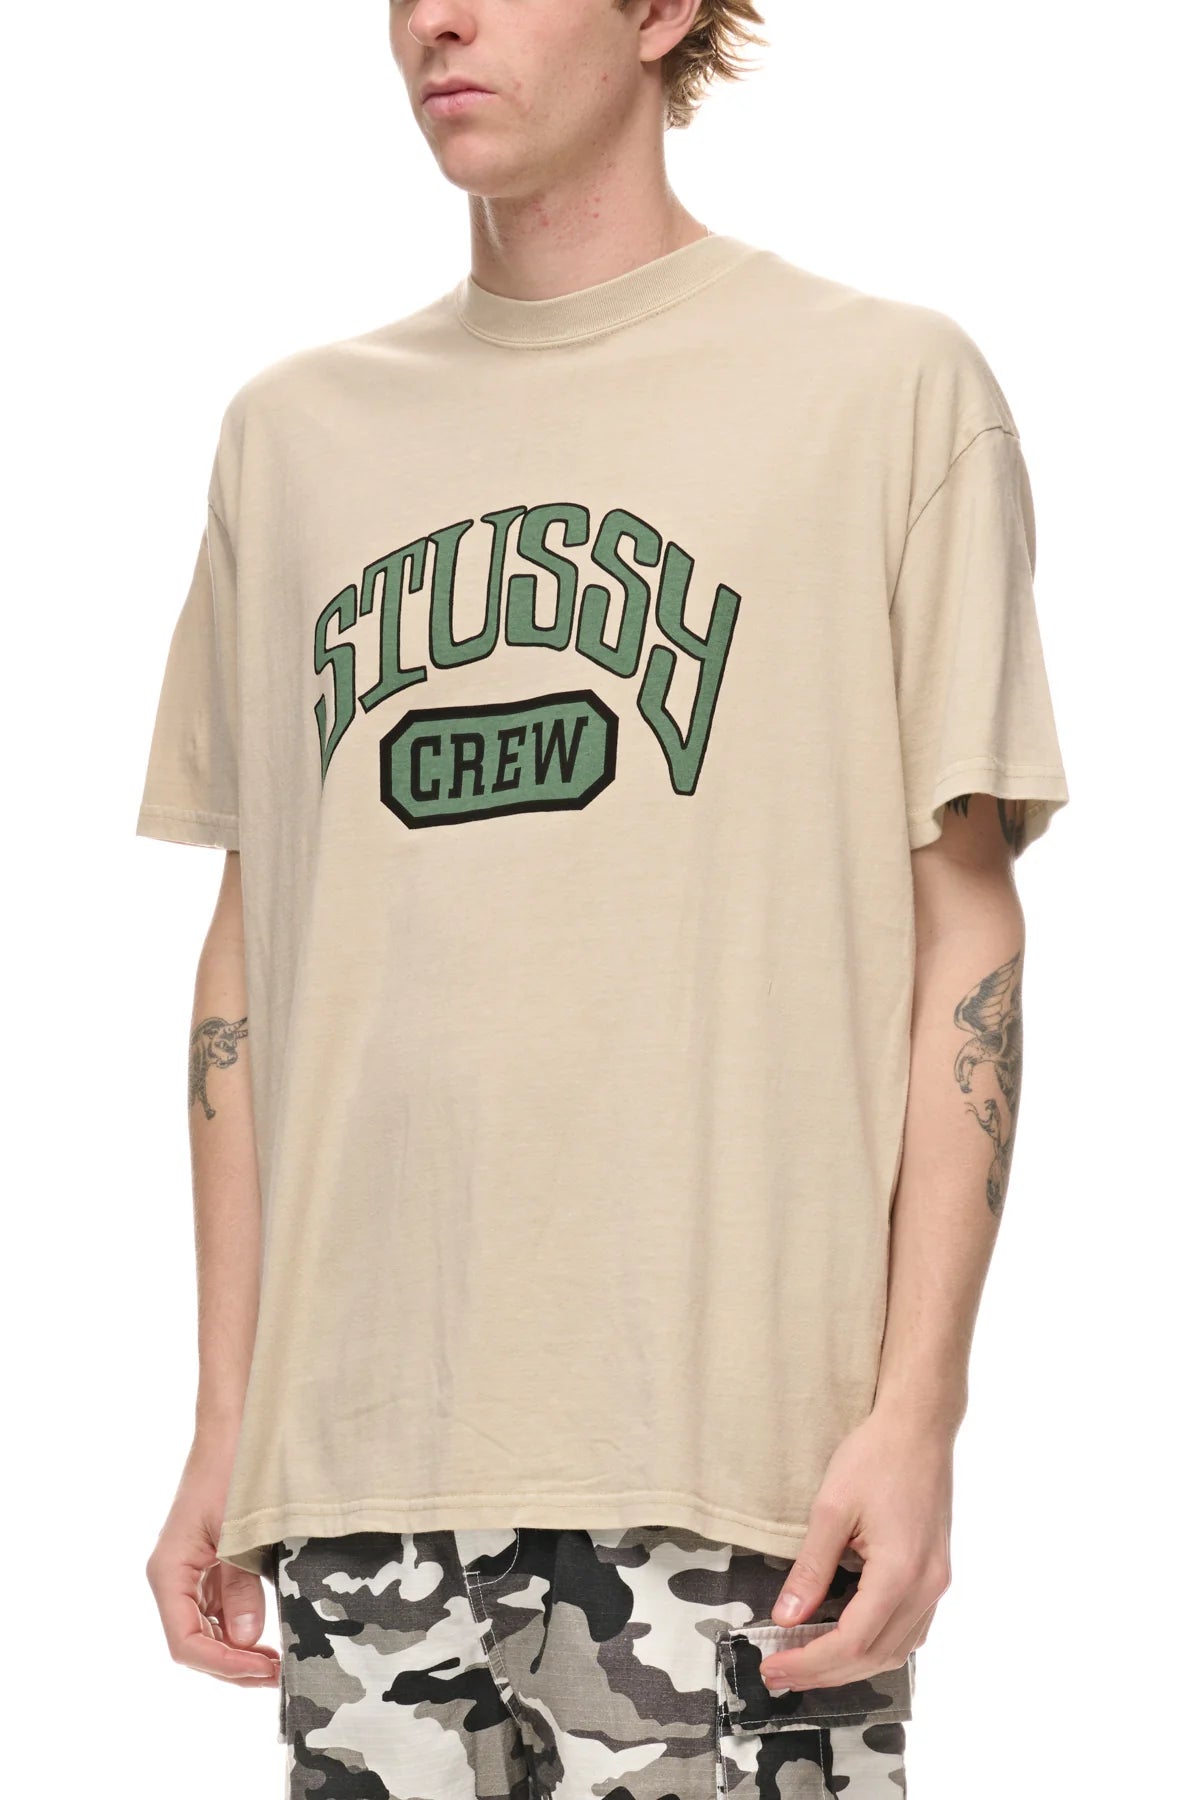 STUSSY CREW SS TEE - pigment natural